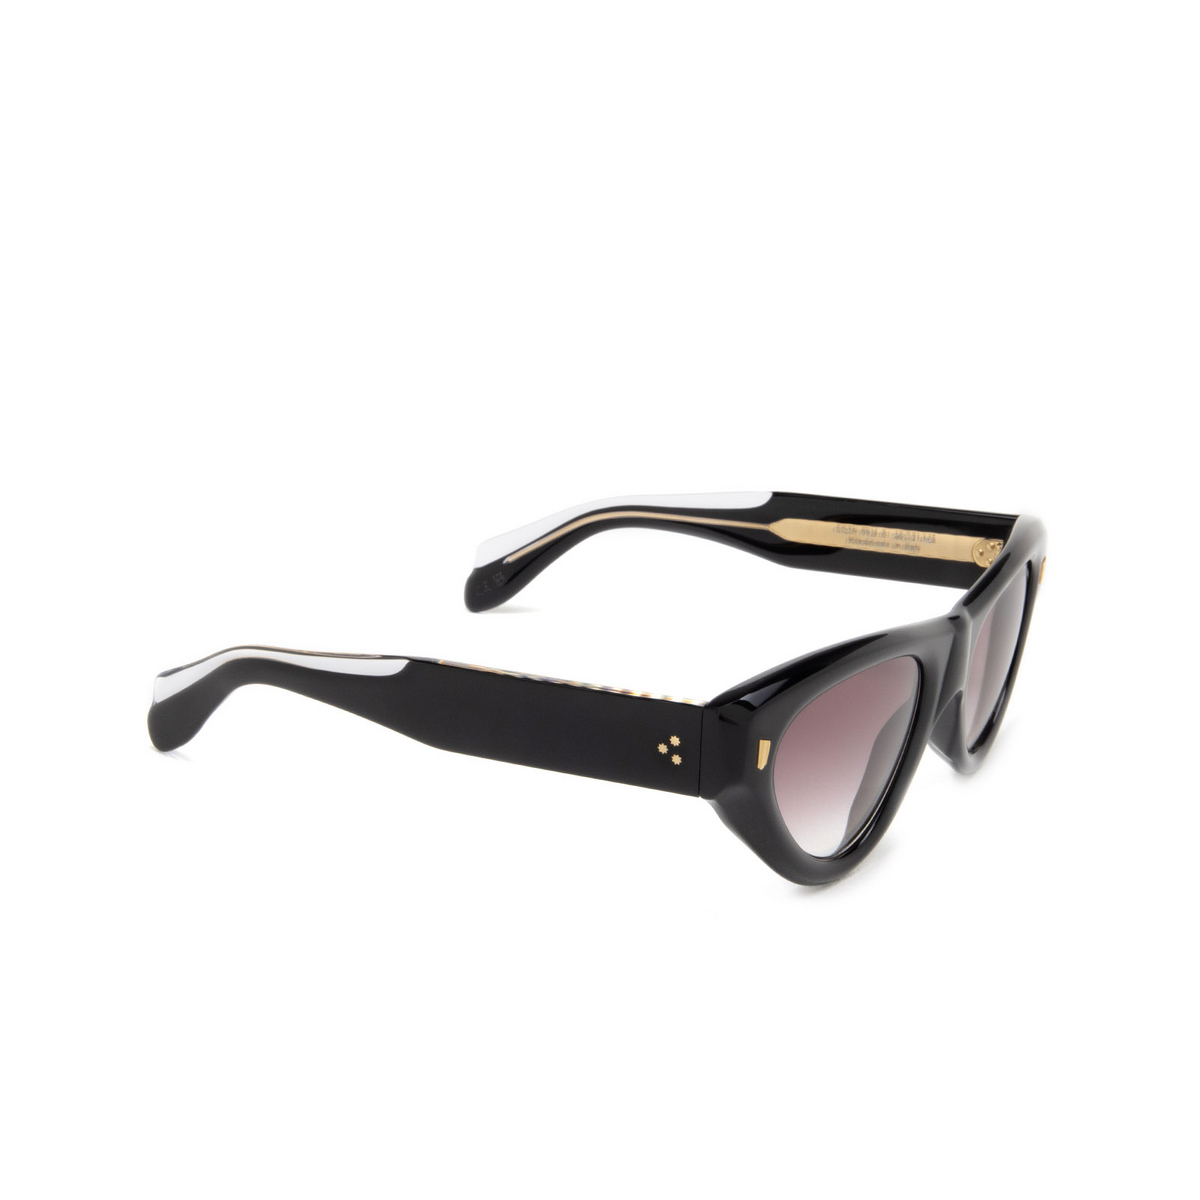 Cutler and Gross 9926 Sunglasses 01 Black - three-quarters view